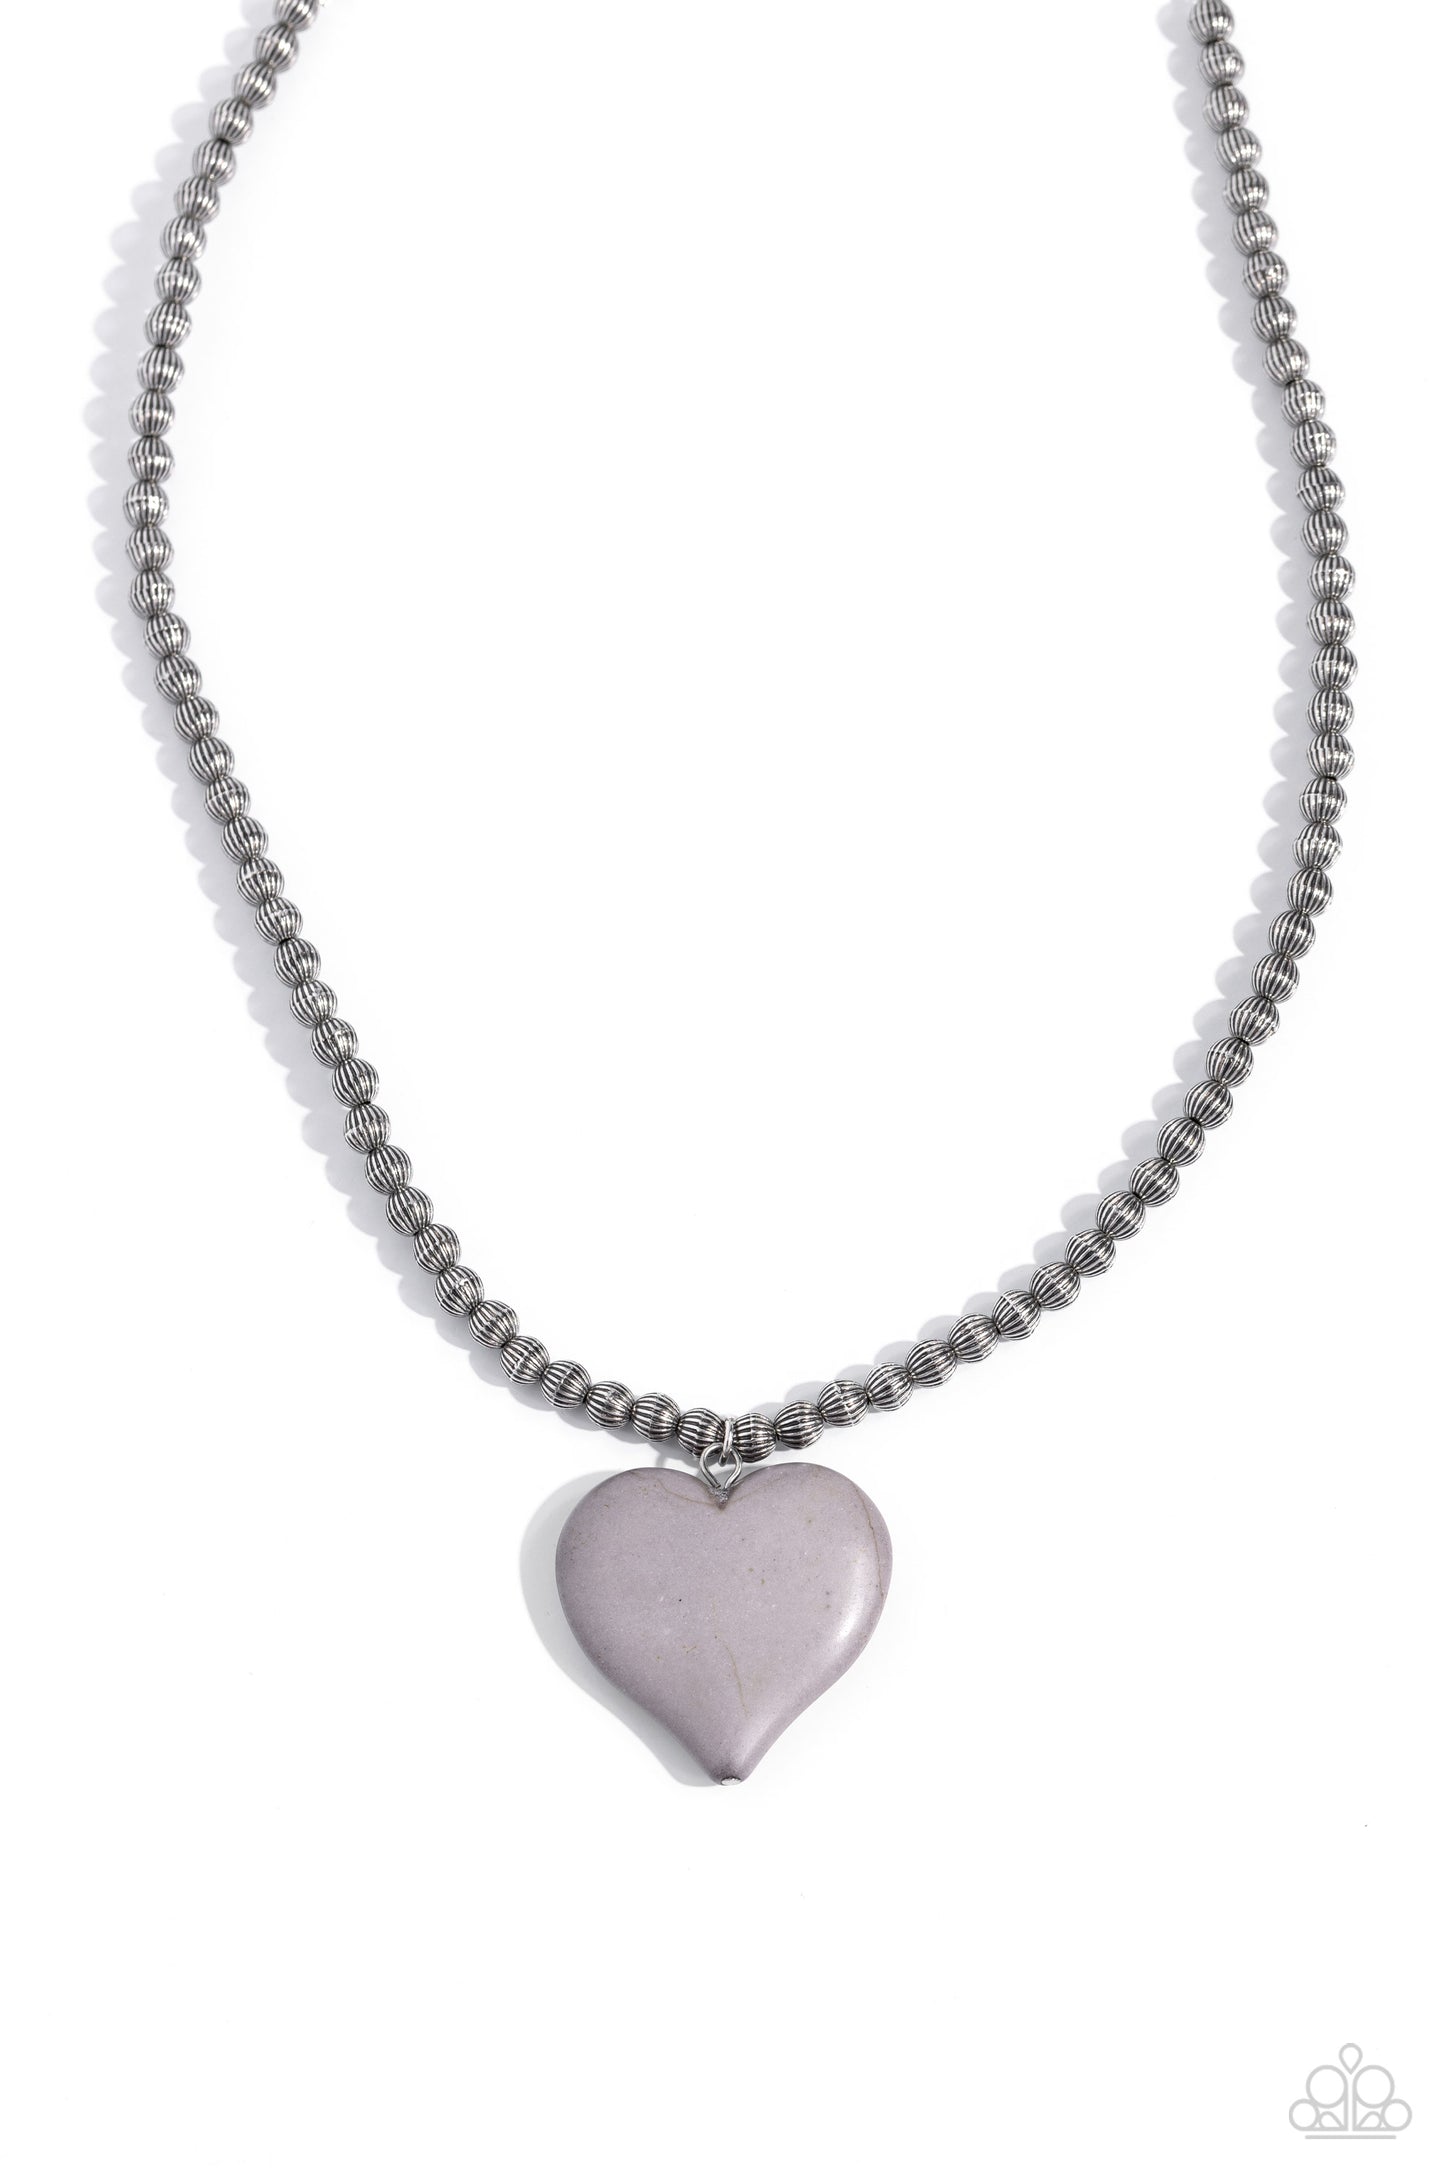 Picturesque Pairing - Silver Necklace